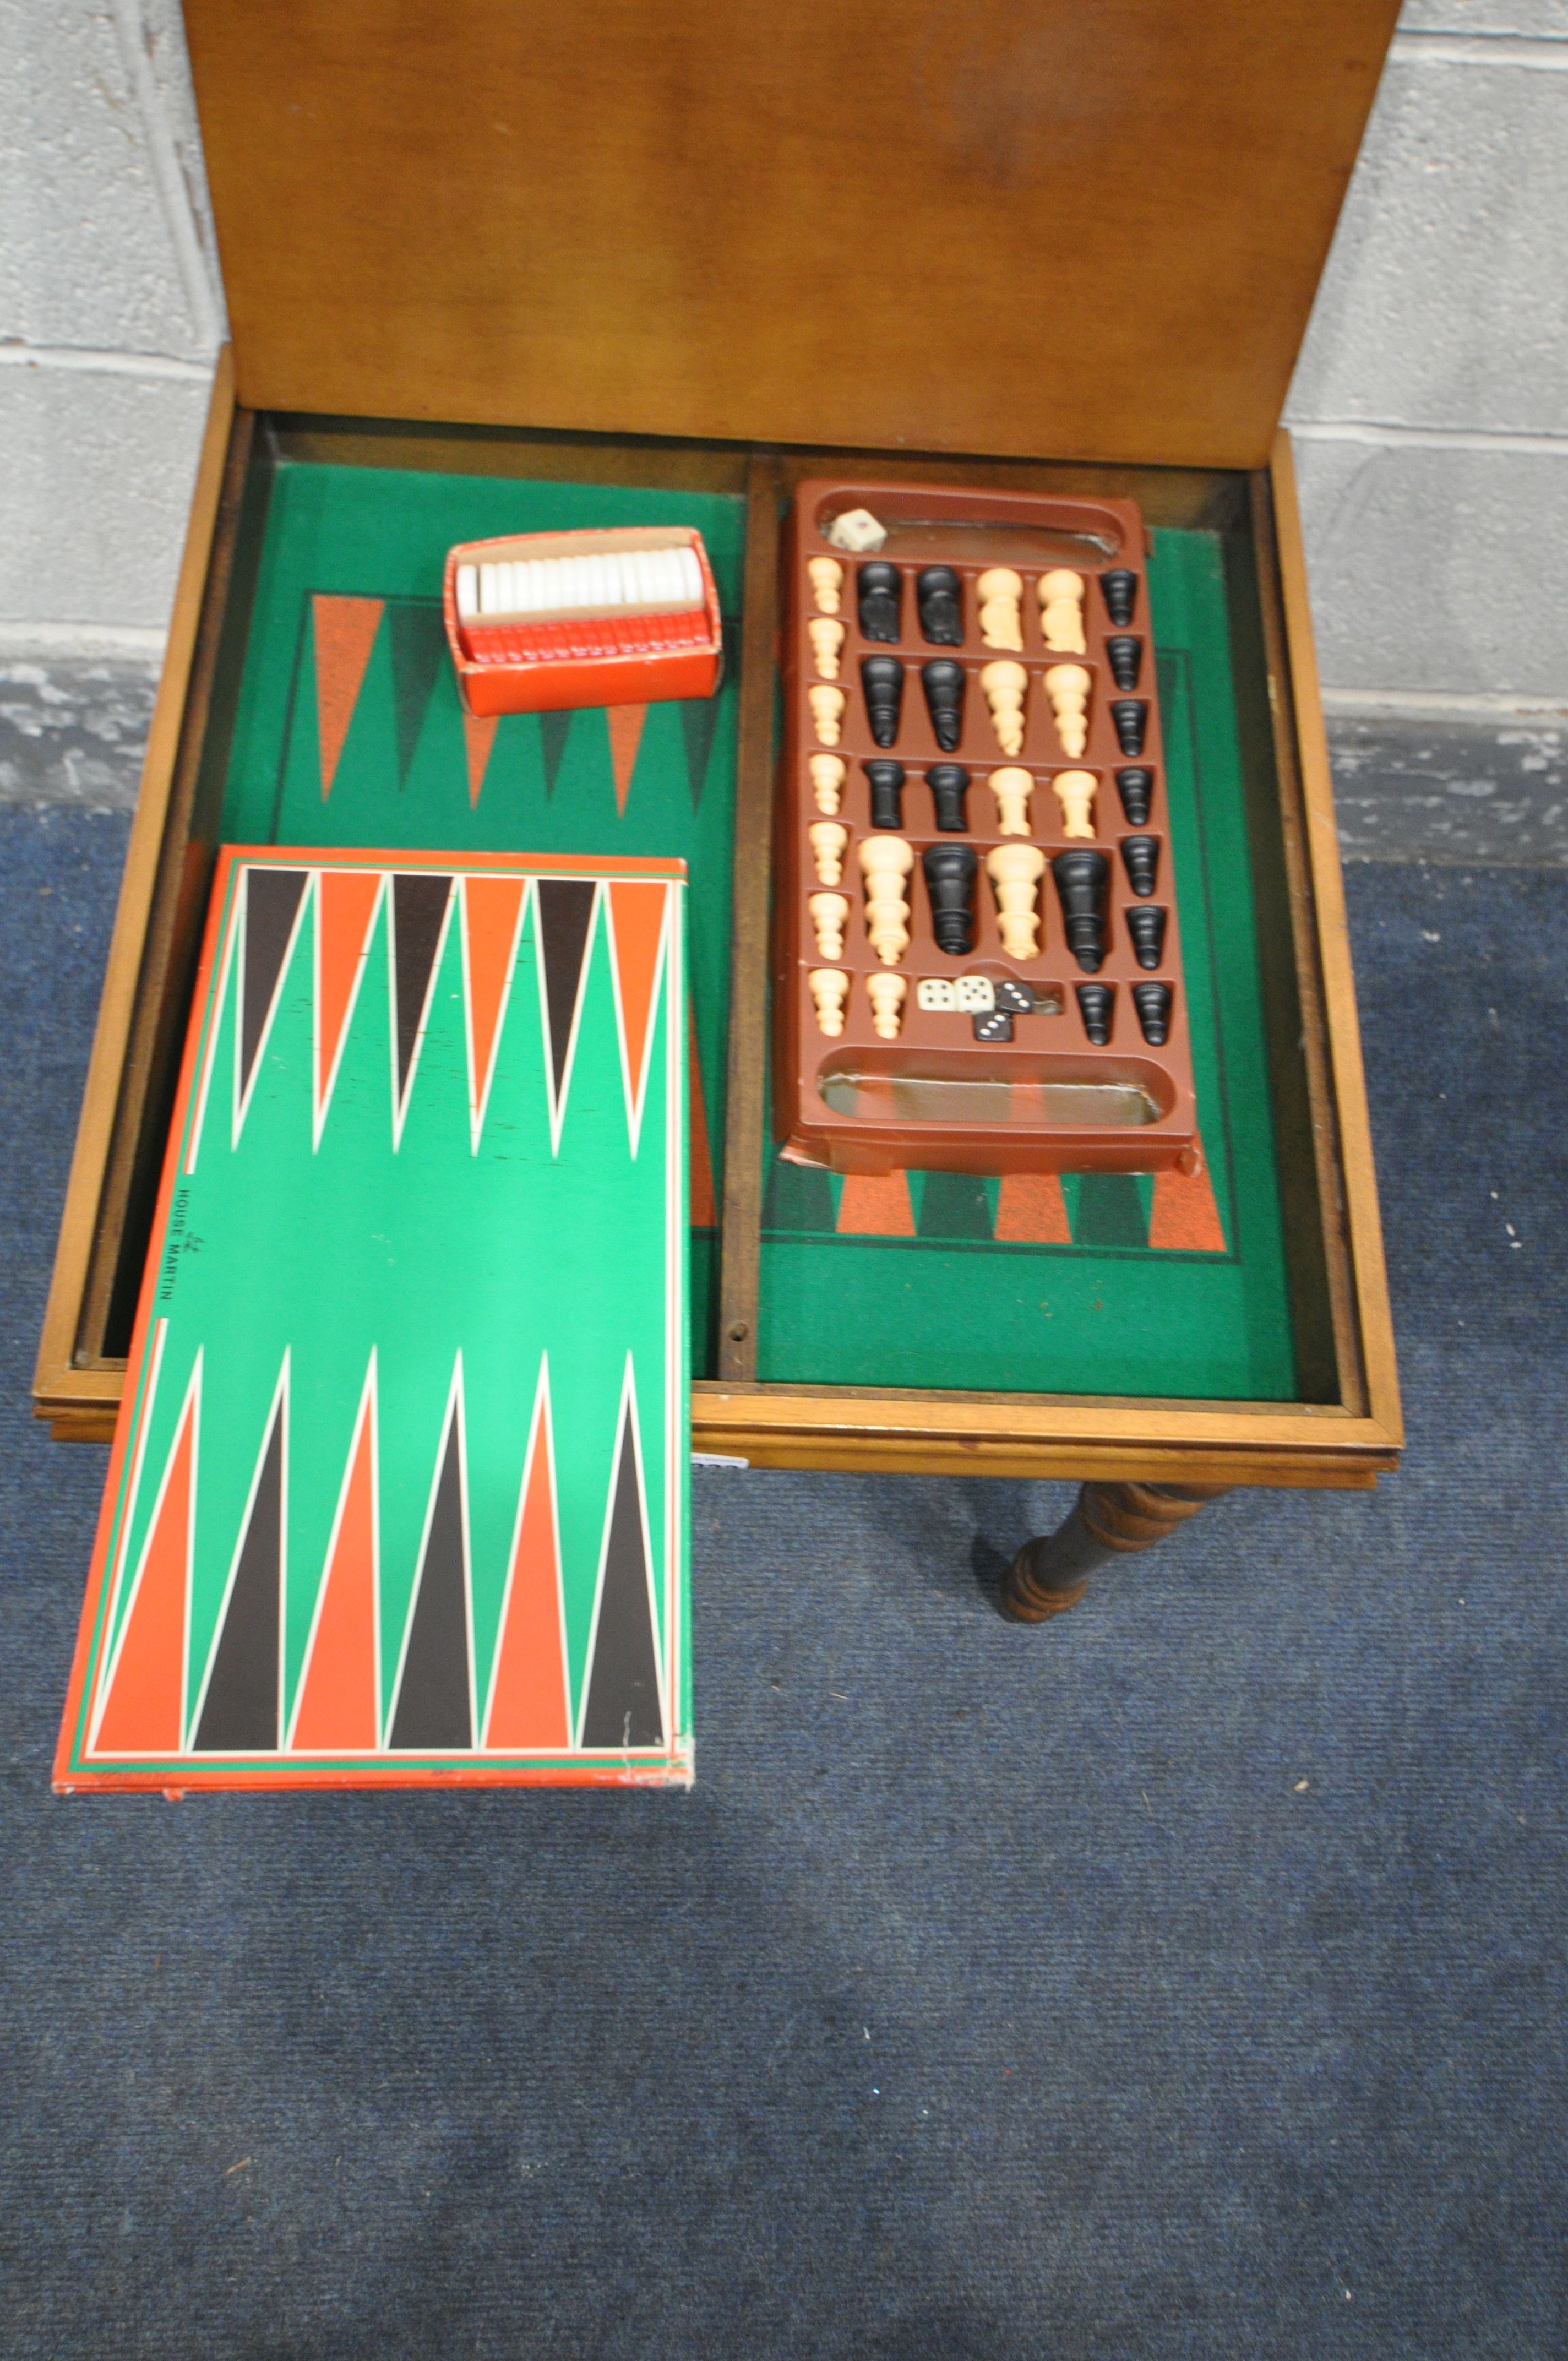 A MAHOGANY GAMES PLAYING TABLE, including chess and backgammon piece, 51cm cubed - Image 2 of 4